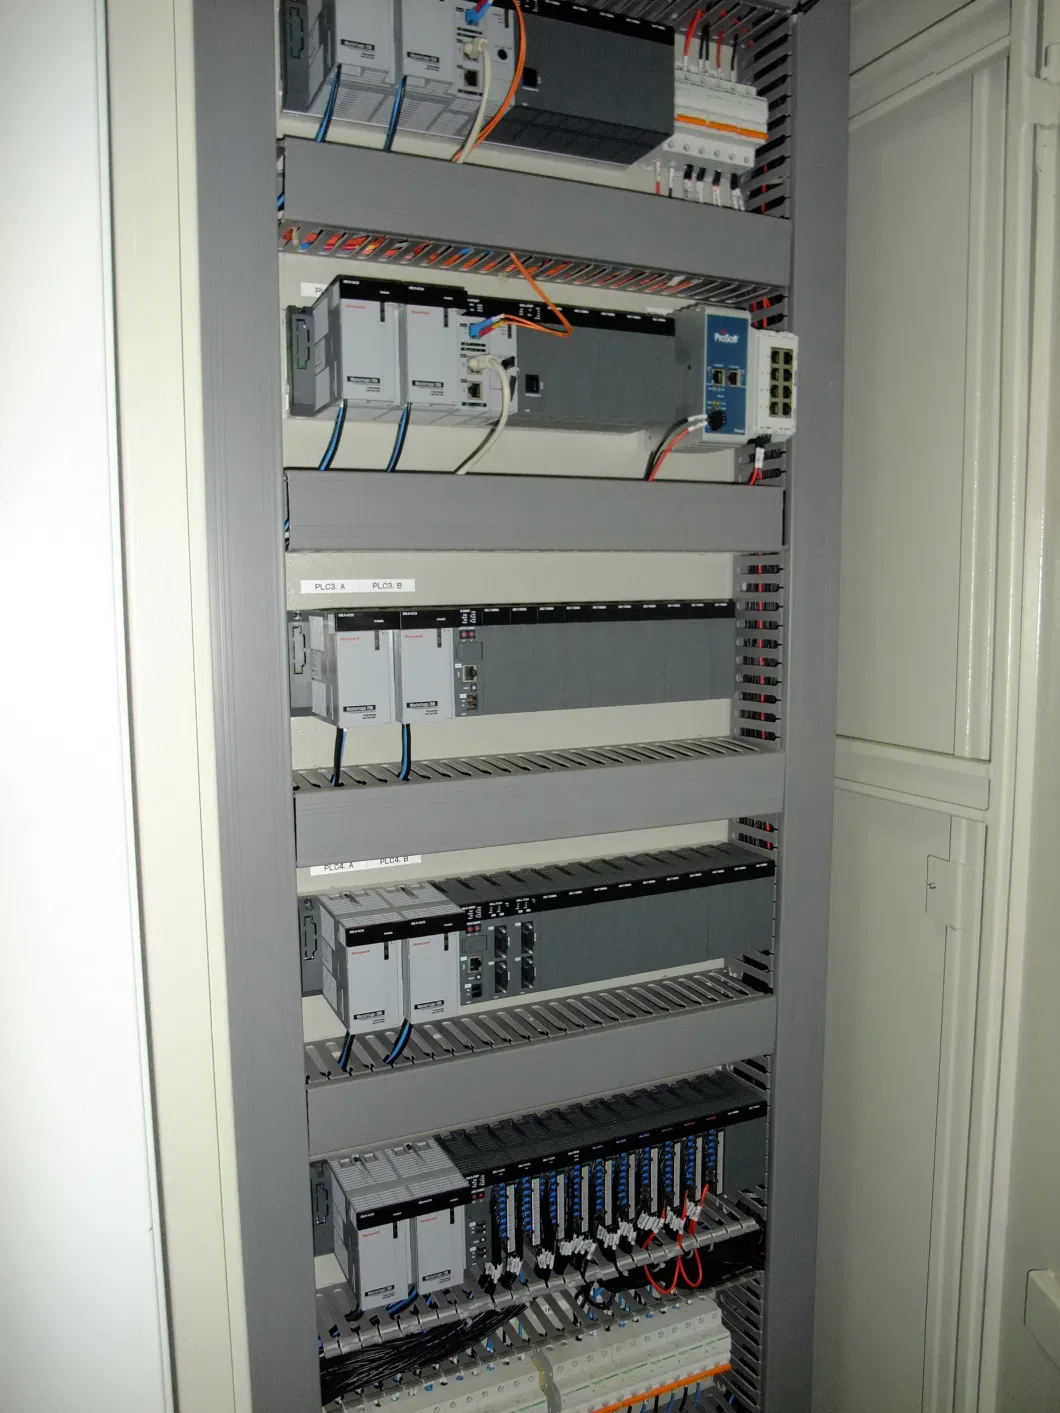 Electrical Control System, PLC Control Panel, Dcs Control System for Power Plant